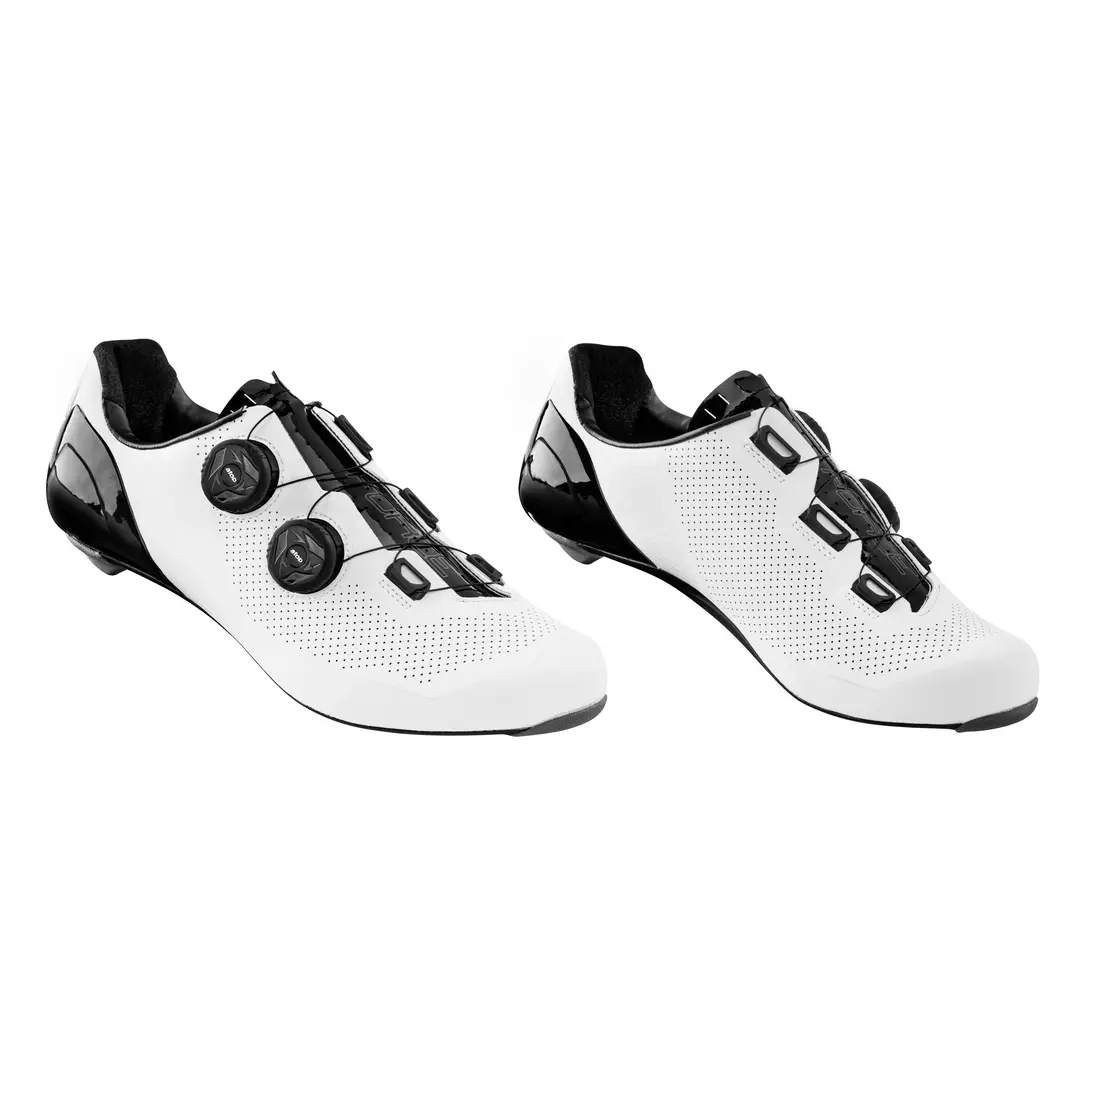 FORCE Road cycling shoes ROAD WARRIOR CARBON, White 9401342